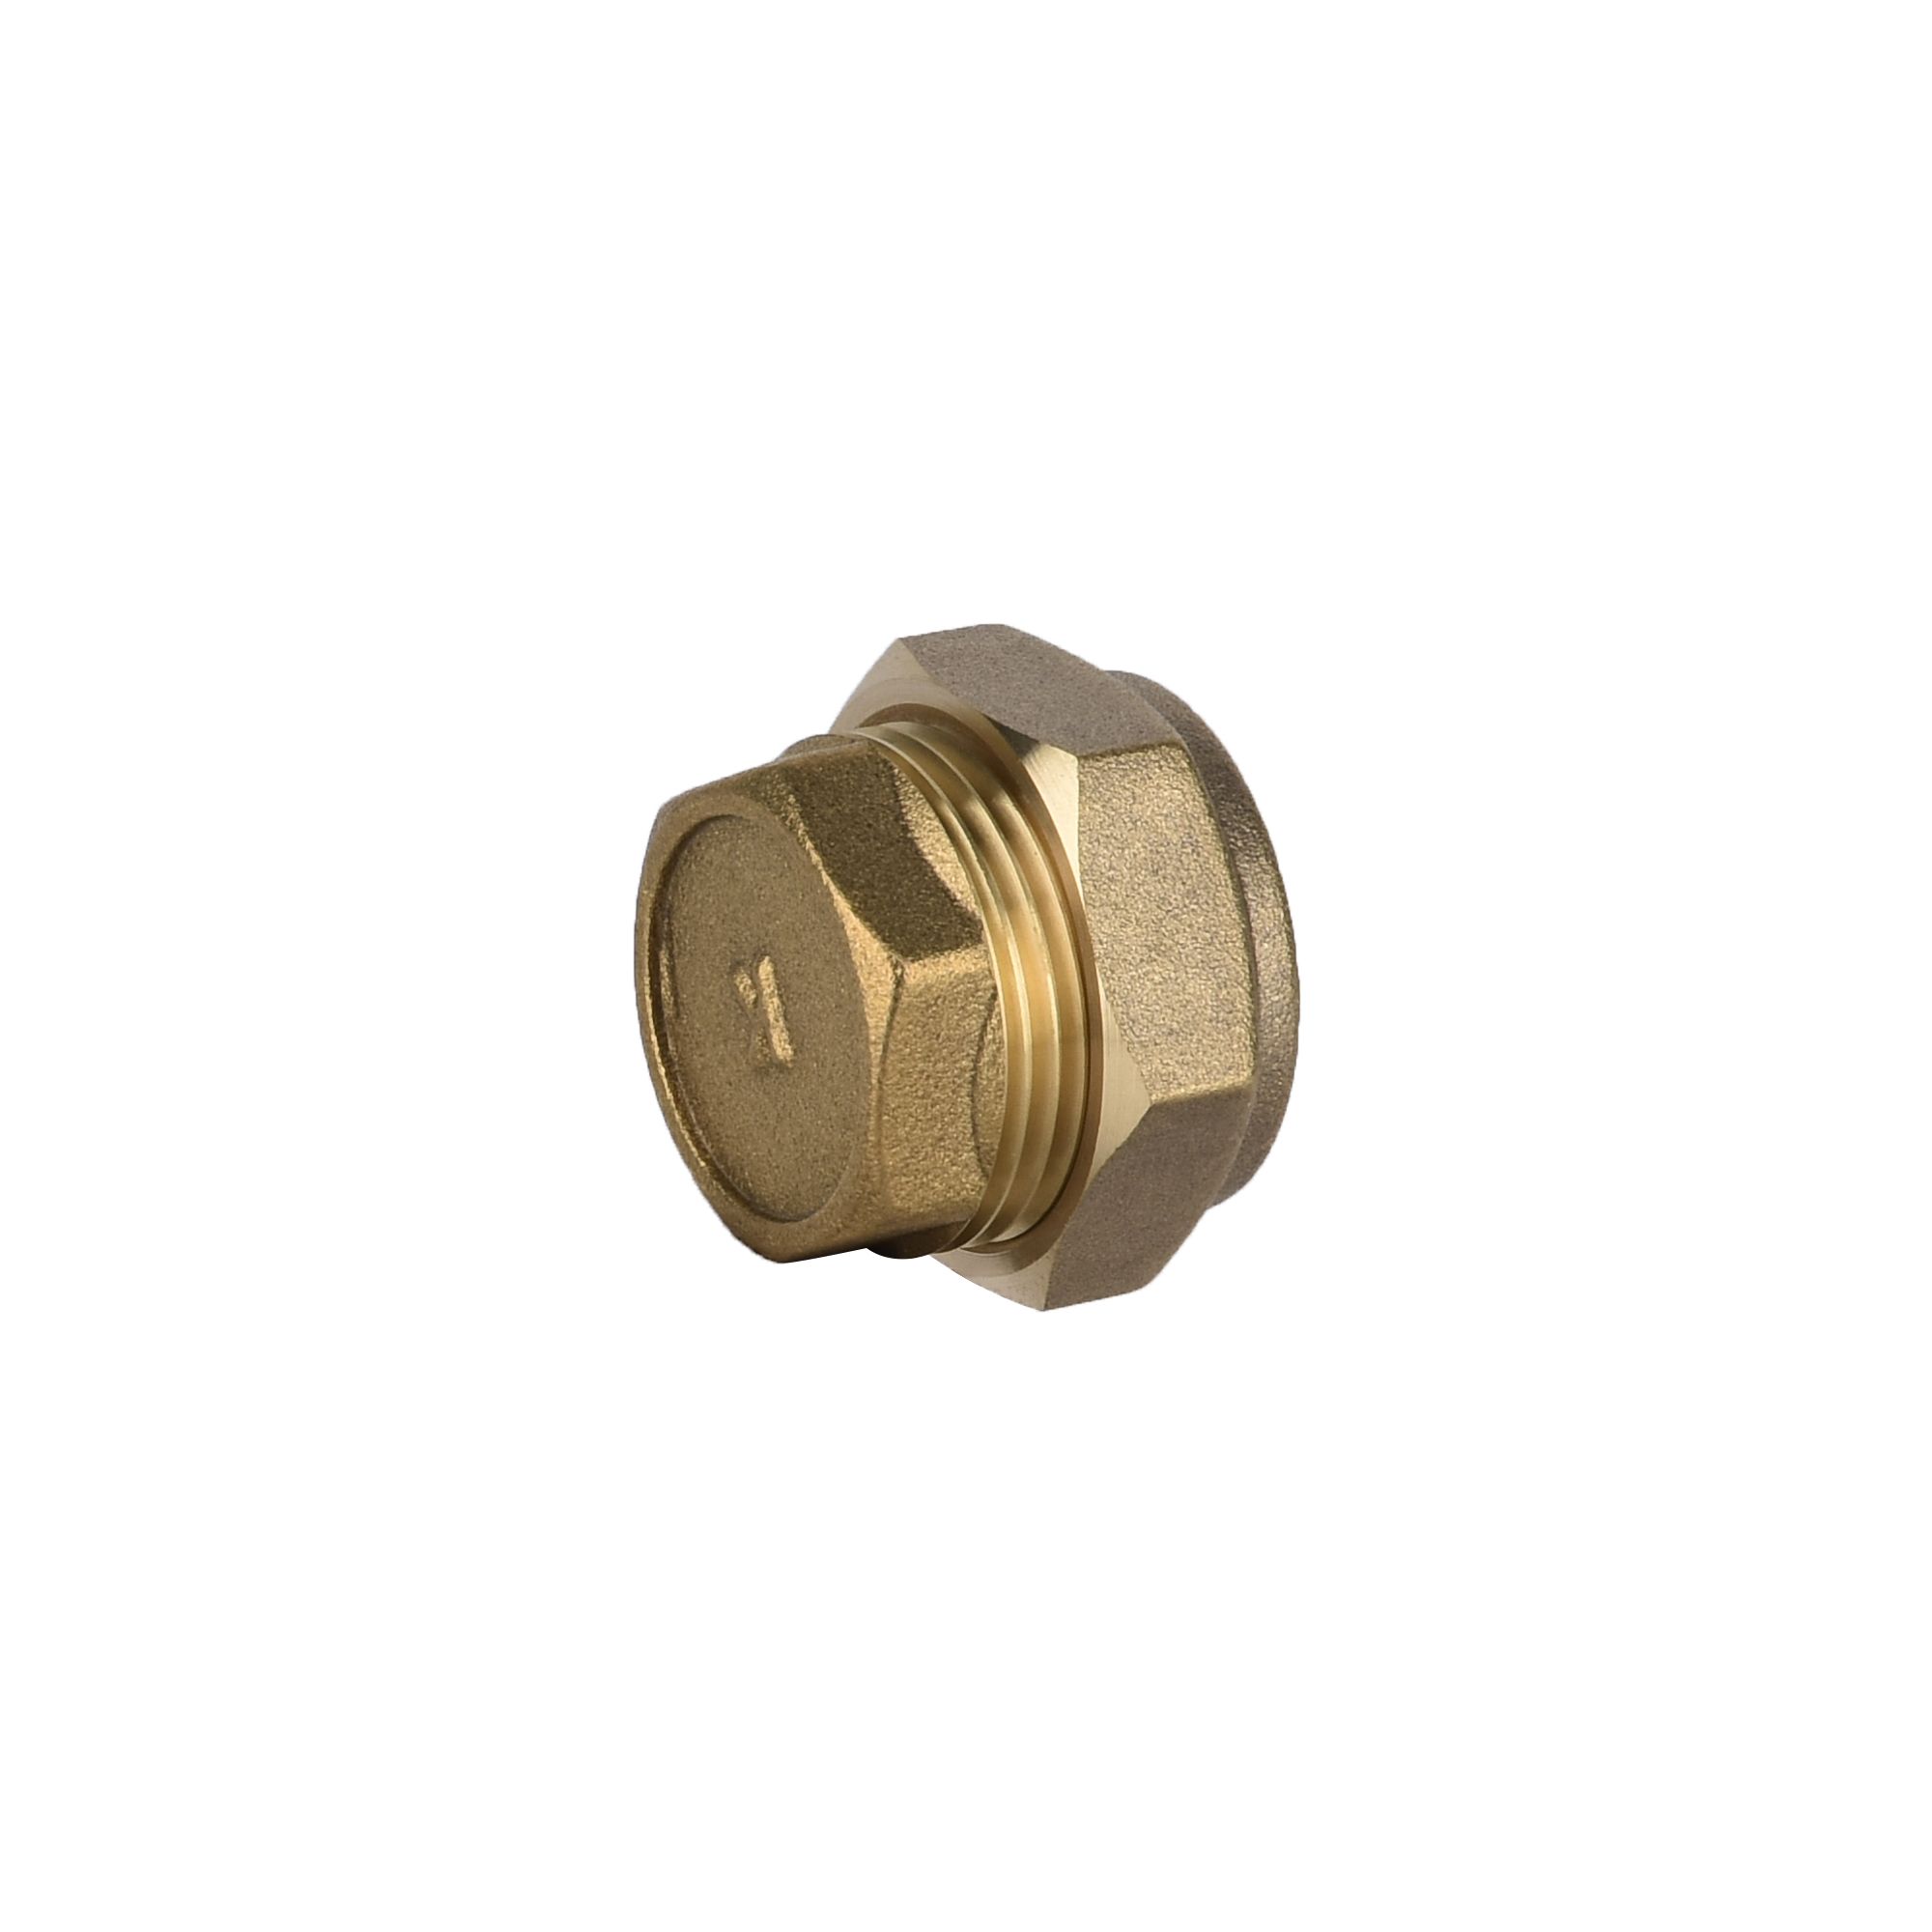 22MM COMPRESSION BRASS PIPE FITTINGS Couplings, Elbows, Tees, Stop Ends  PACKS